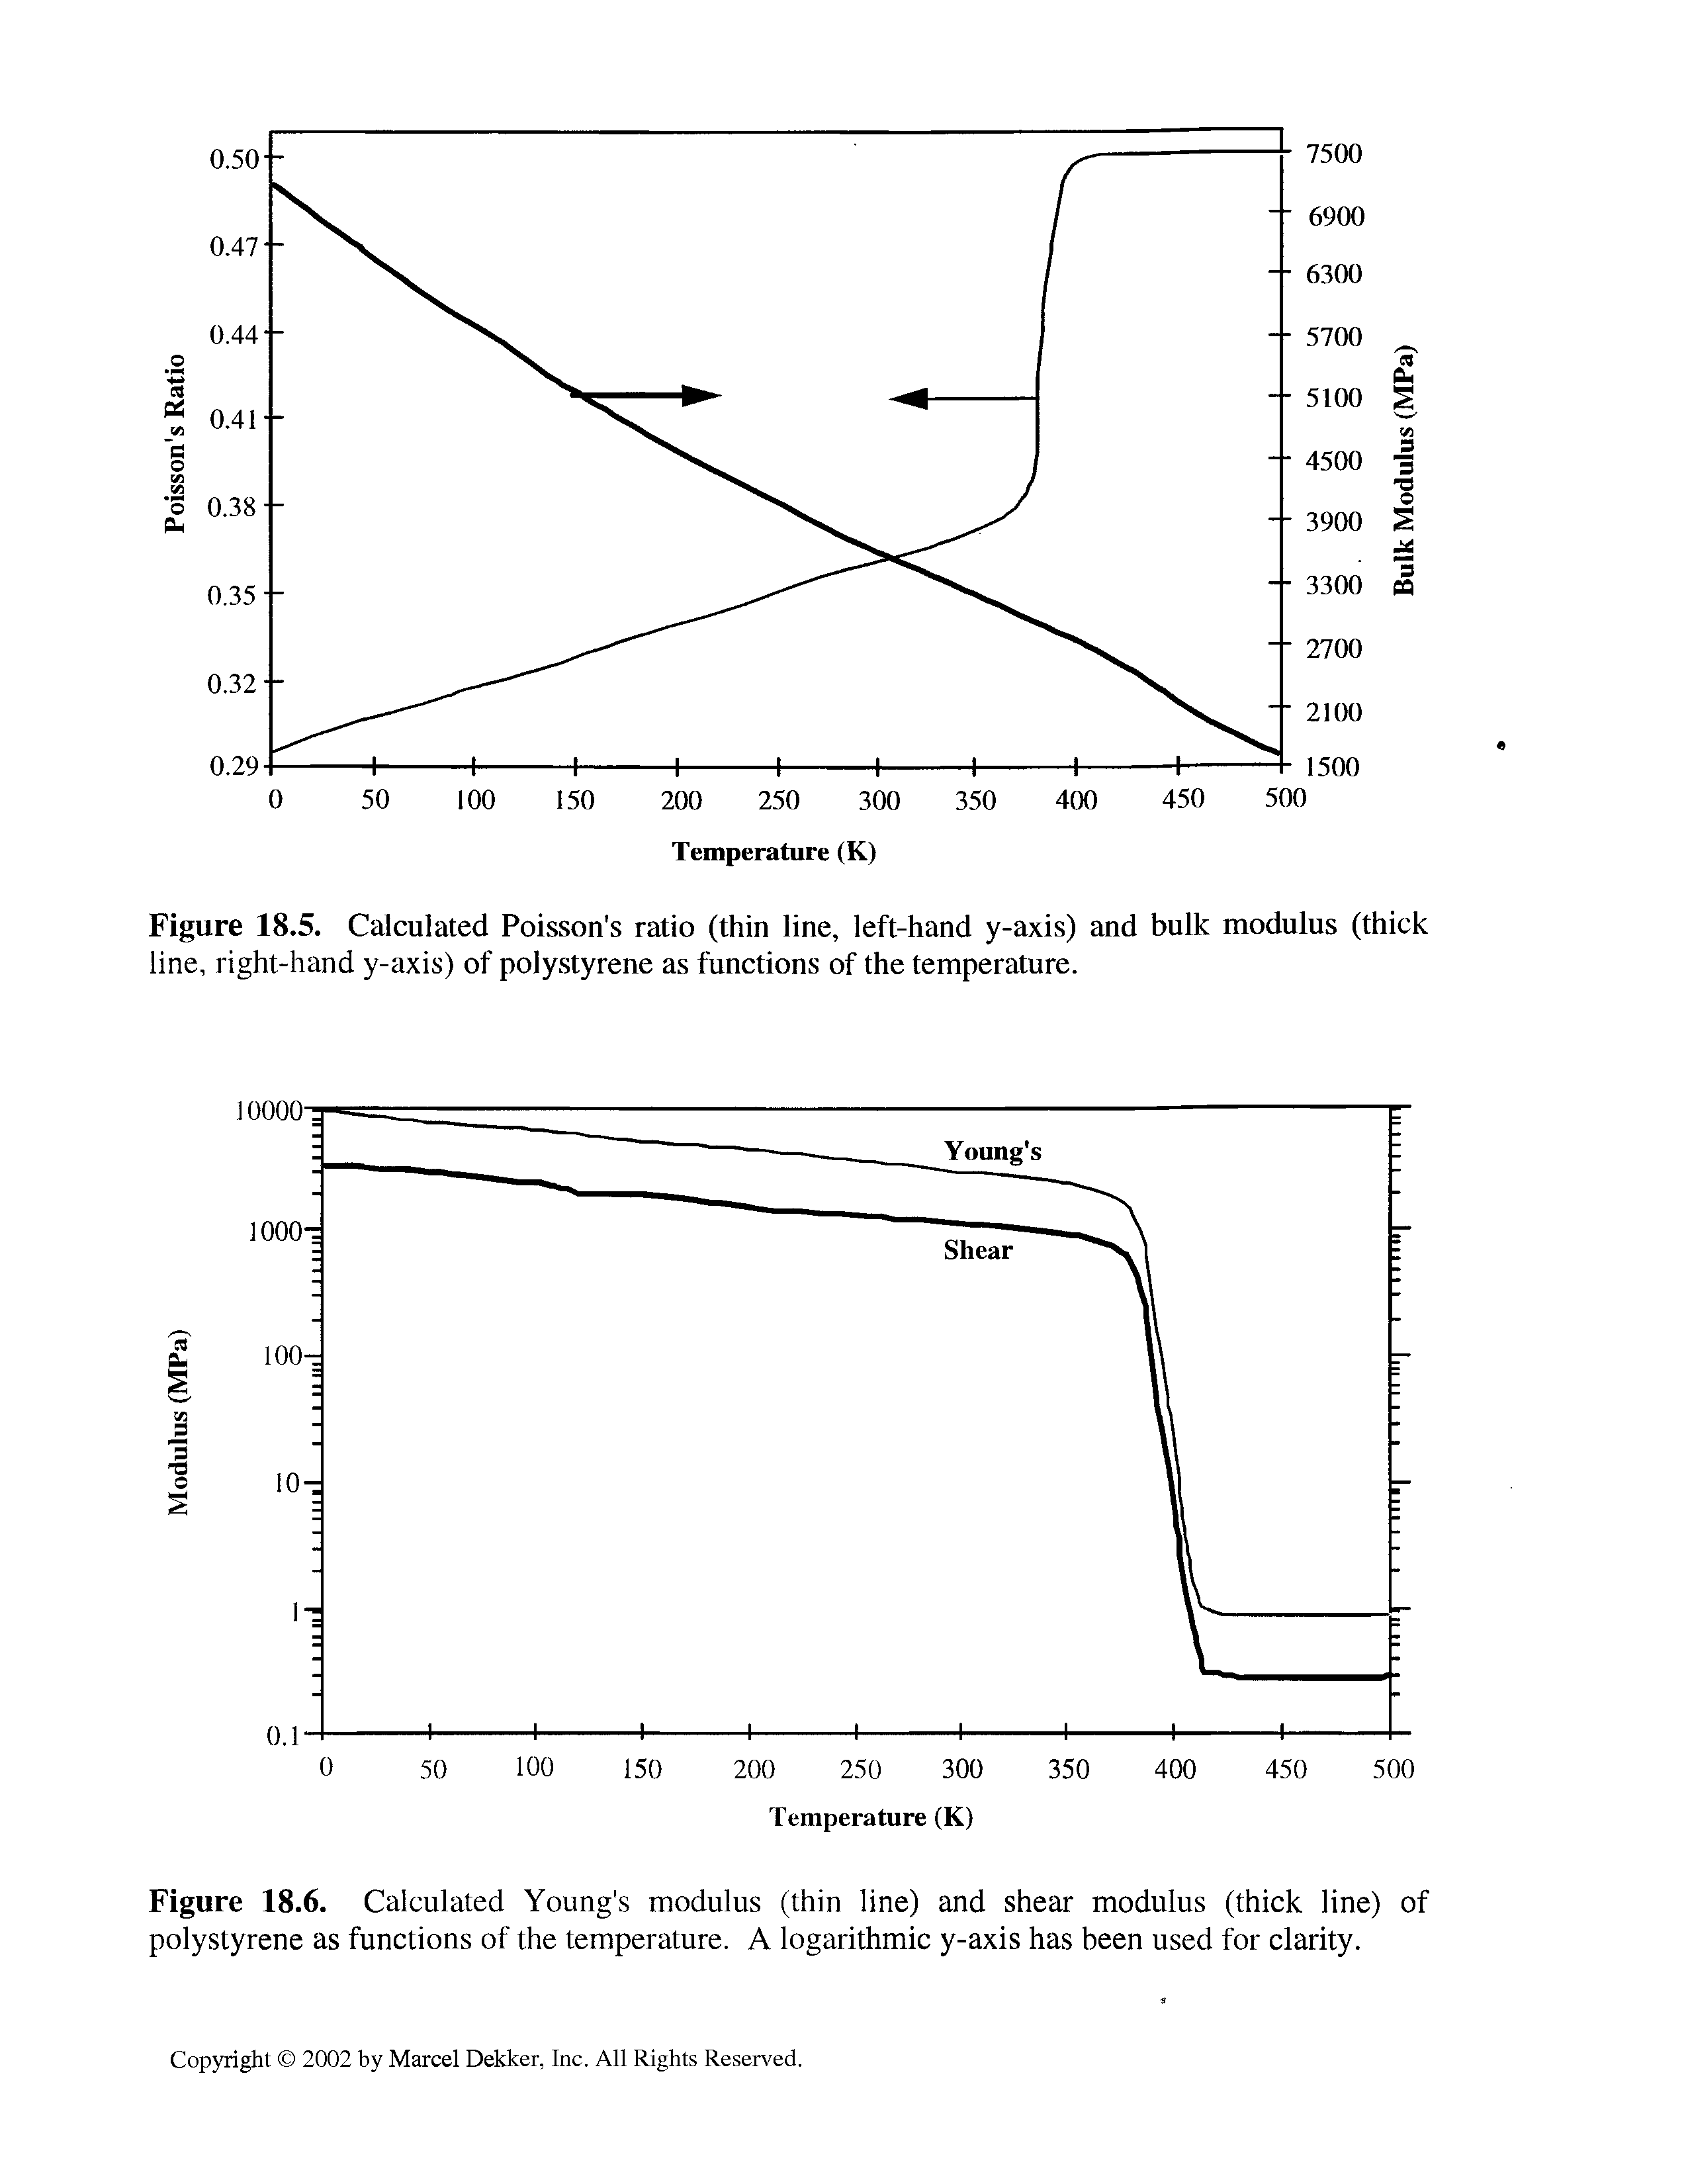 Figure 18.6. Calculated Young s modulus (thin line) and shear modulus (thick line) of polystyrene as functions of the temperature. A logarithmic y-axis has been used for clarity.